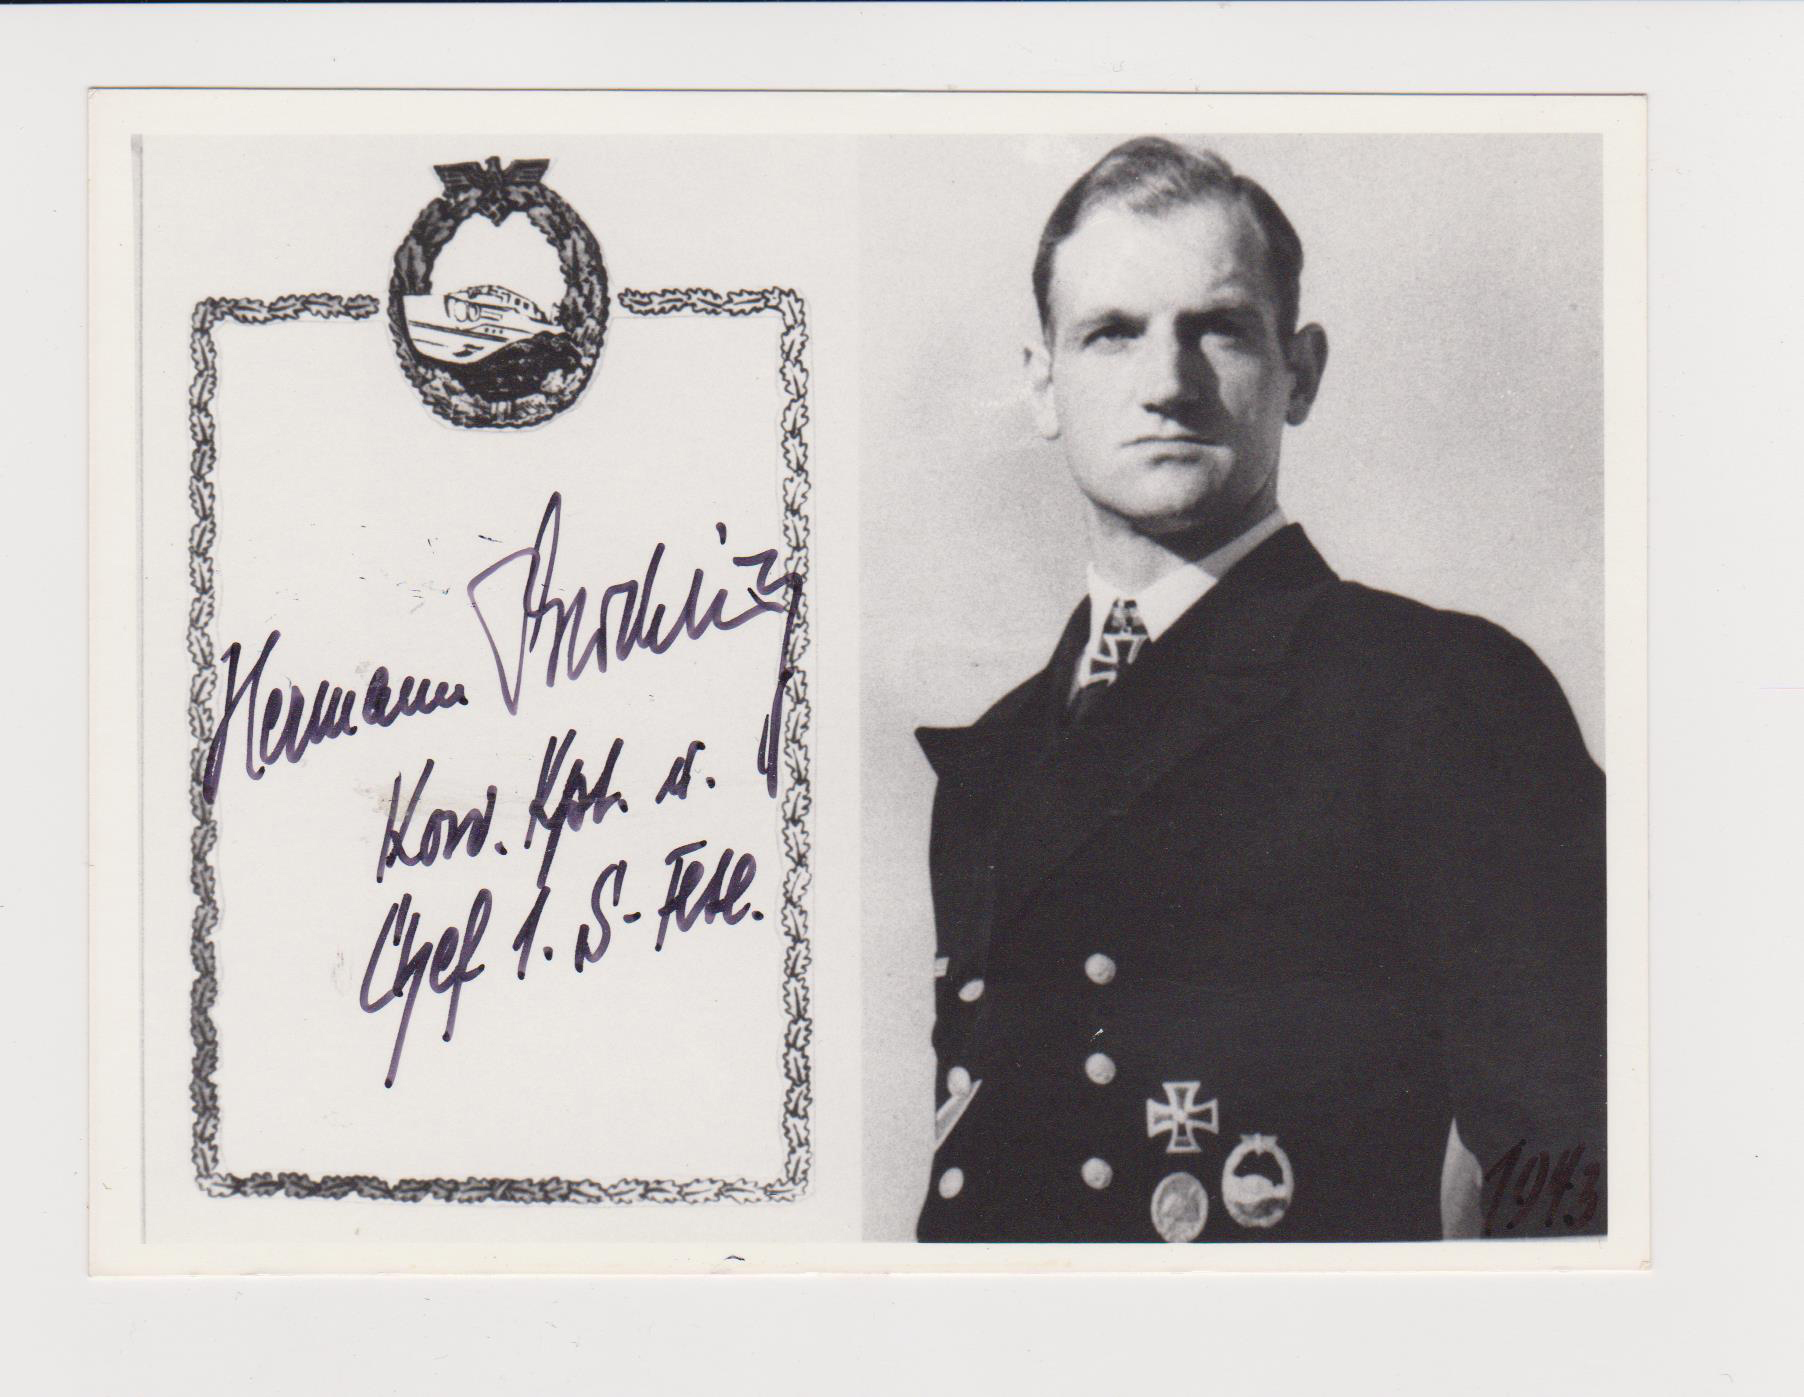 Autographed picture of Hermann Buechting